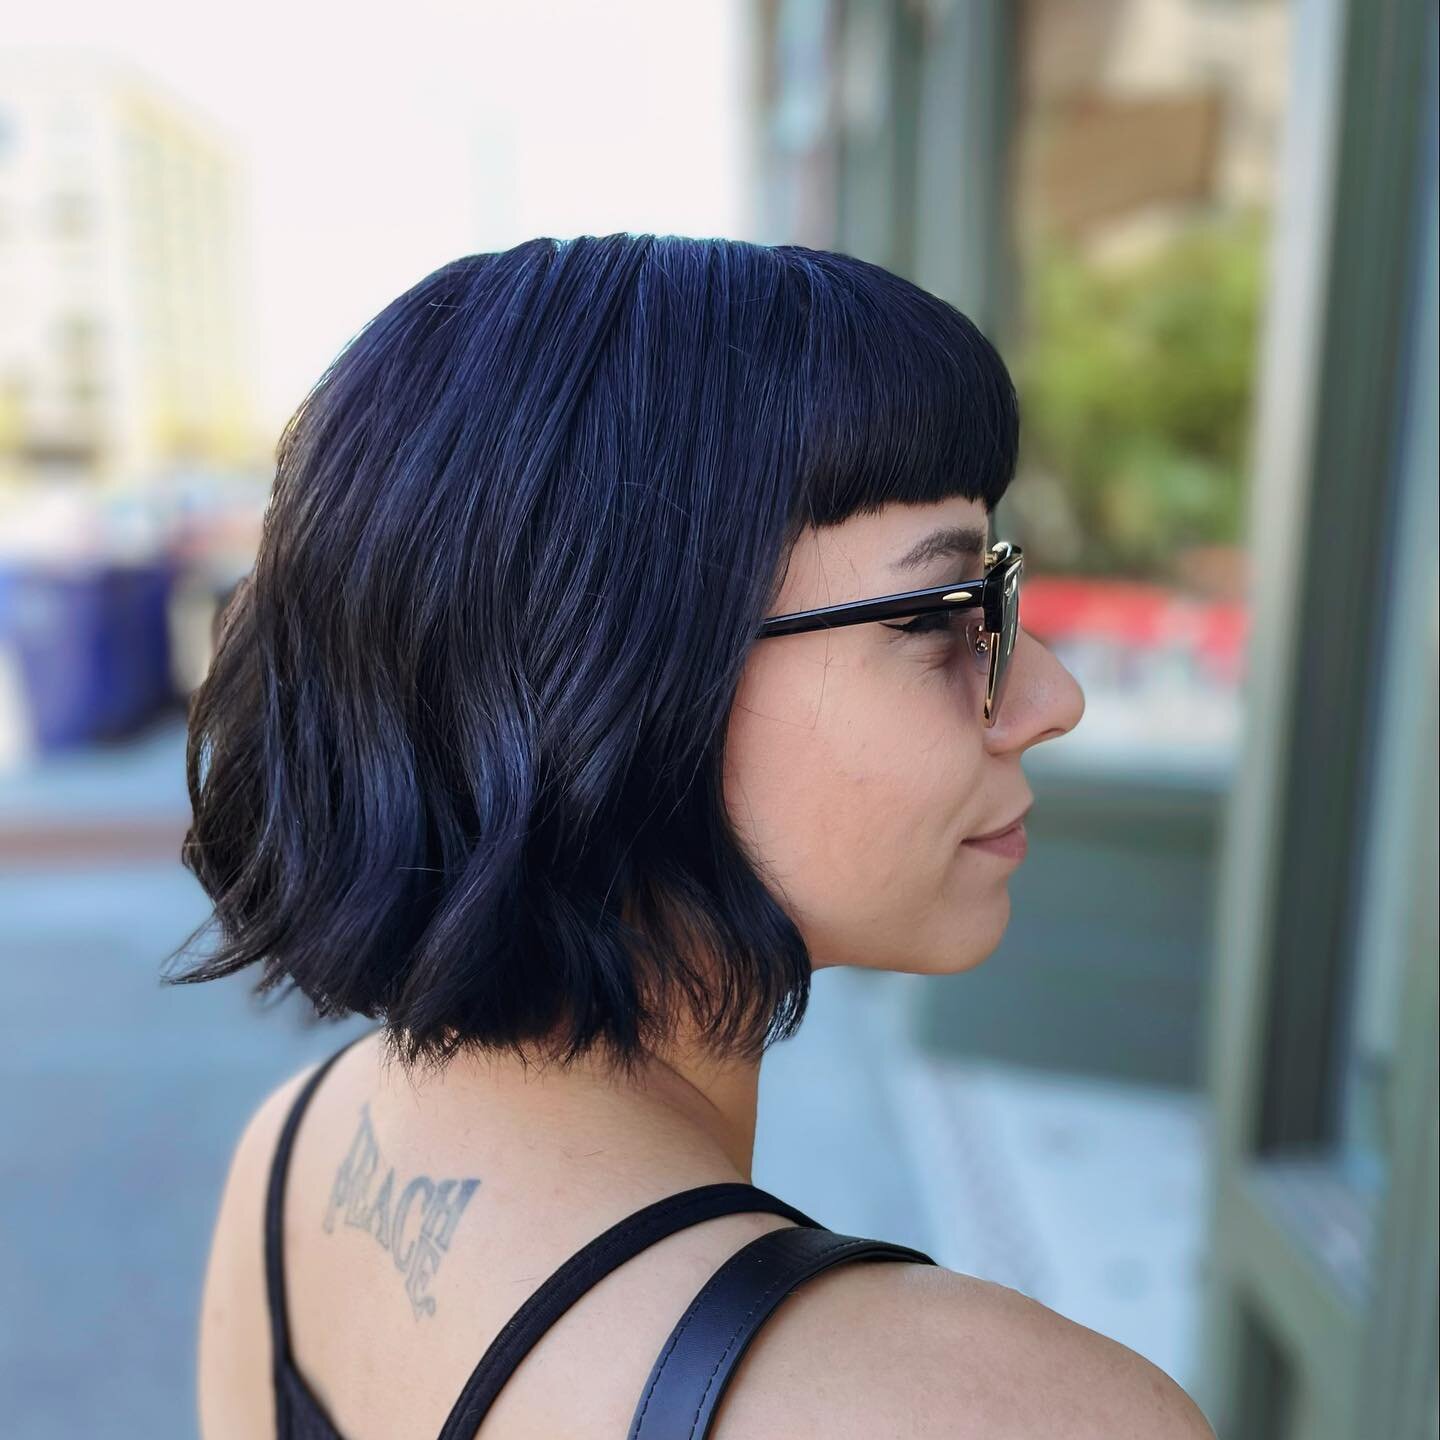 Razor bob with a Bettie bang. Using a razor, instead of scissors, creates lots of texture on the ends. Not to mention it takes off a lot of weight from the hair. Perfect for summer. Thank you @the_walking_ren for trusting me with your hair. 

Thinkin